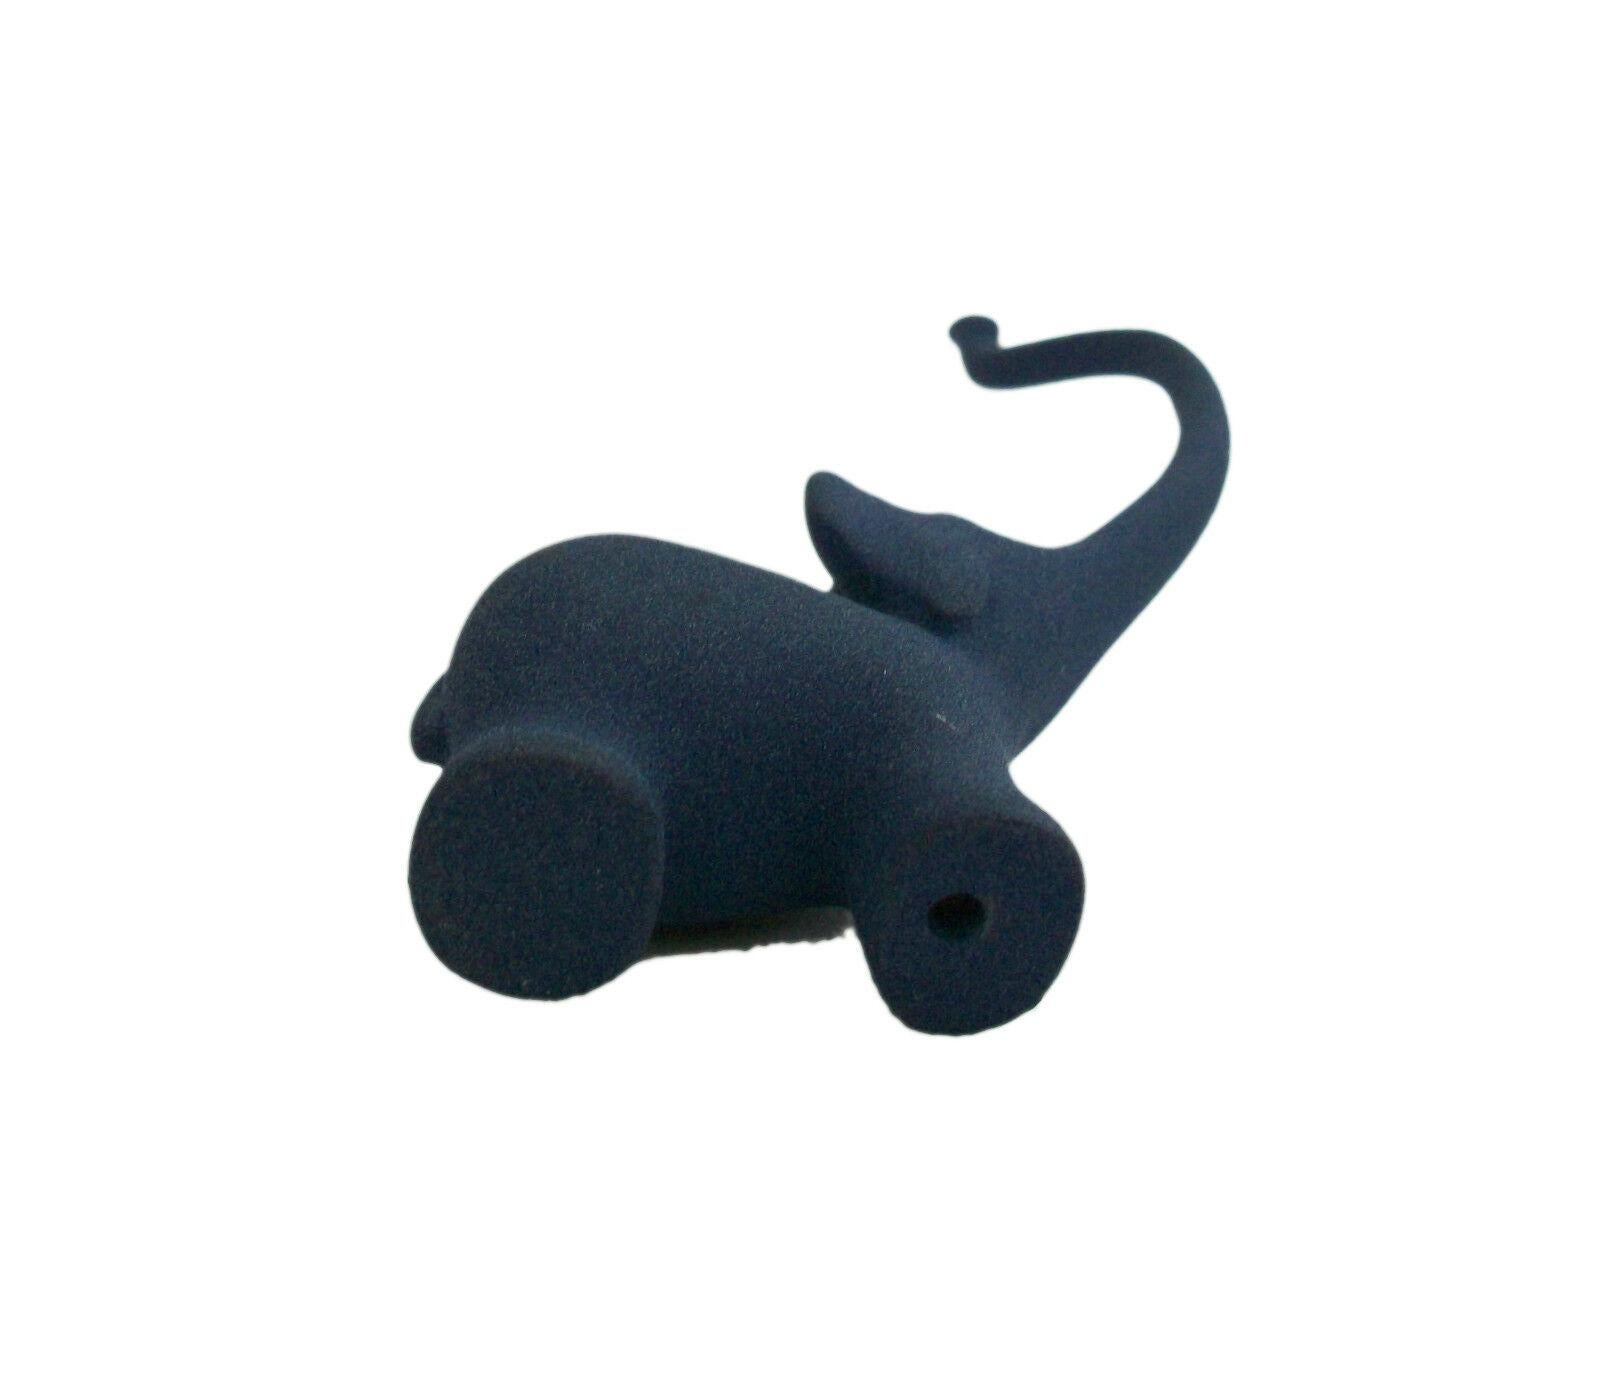 Vintage Elephant Ring Holder - Cast Metal with Powder Coat - 20th Century For Sale 3